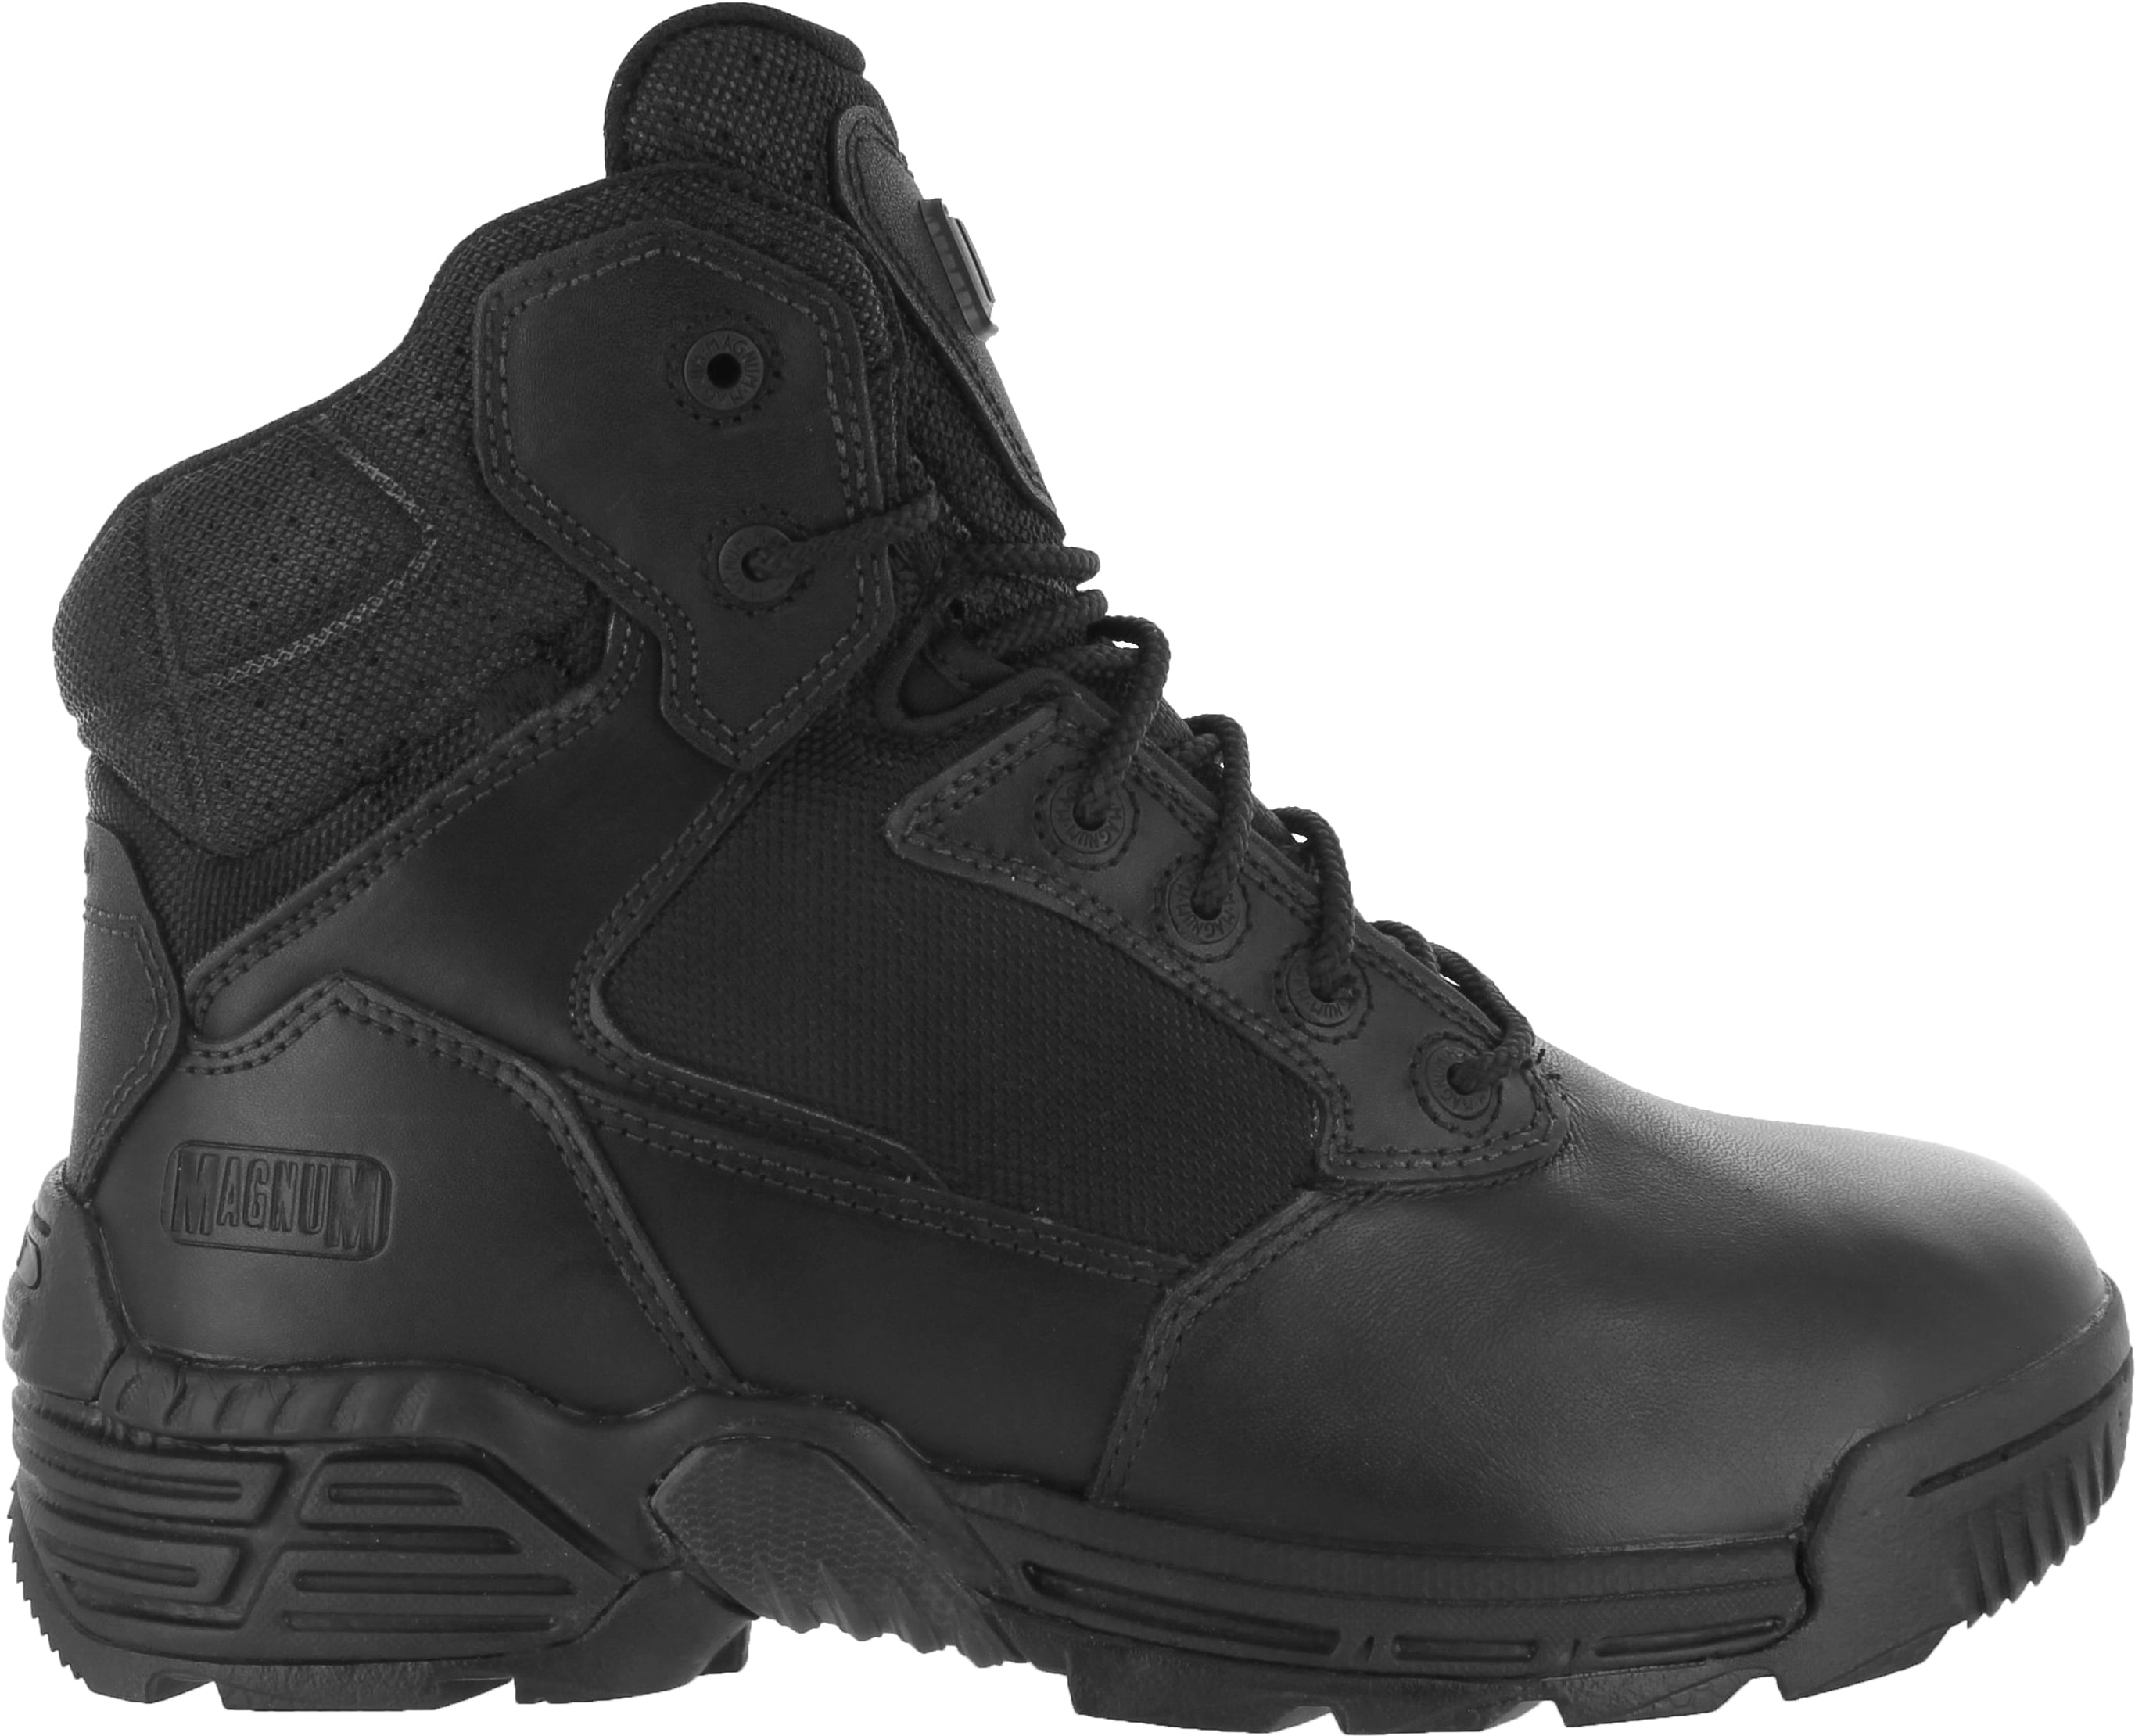 MAGNUM 6.0 STEALTH FORCE LEATHER BOOTS COMPOSITE TOE 04117 